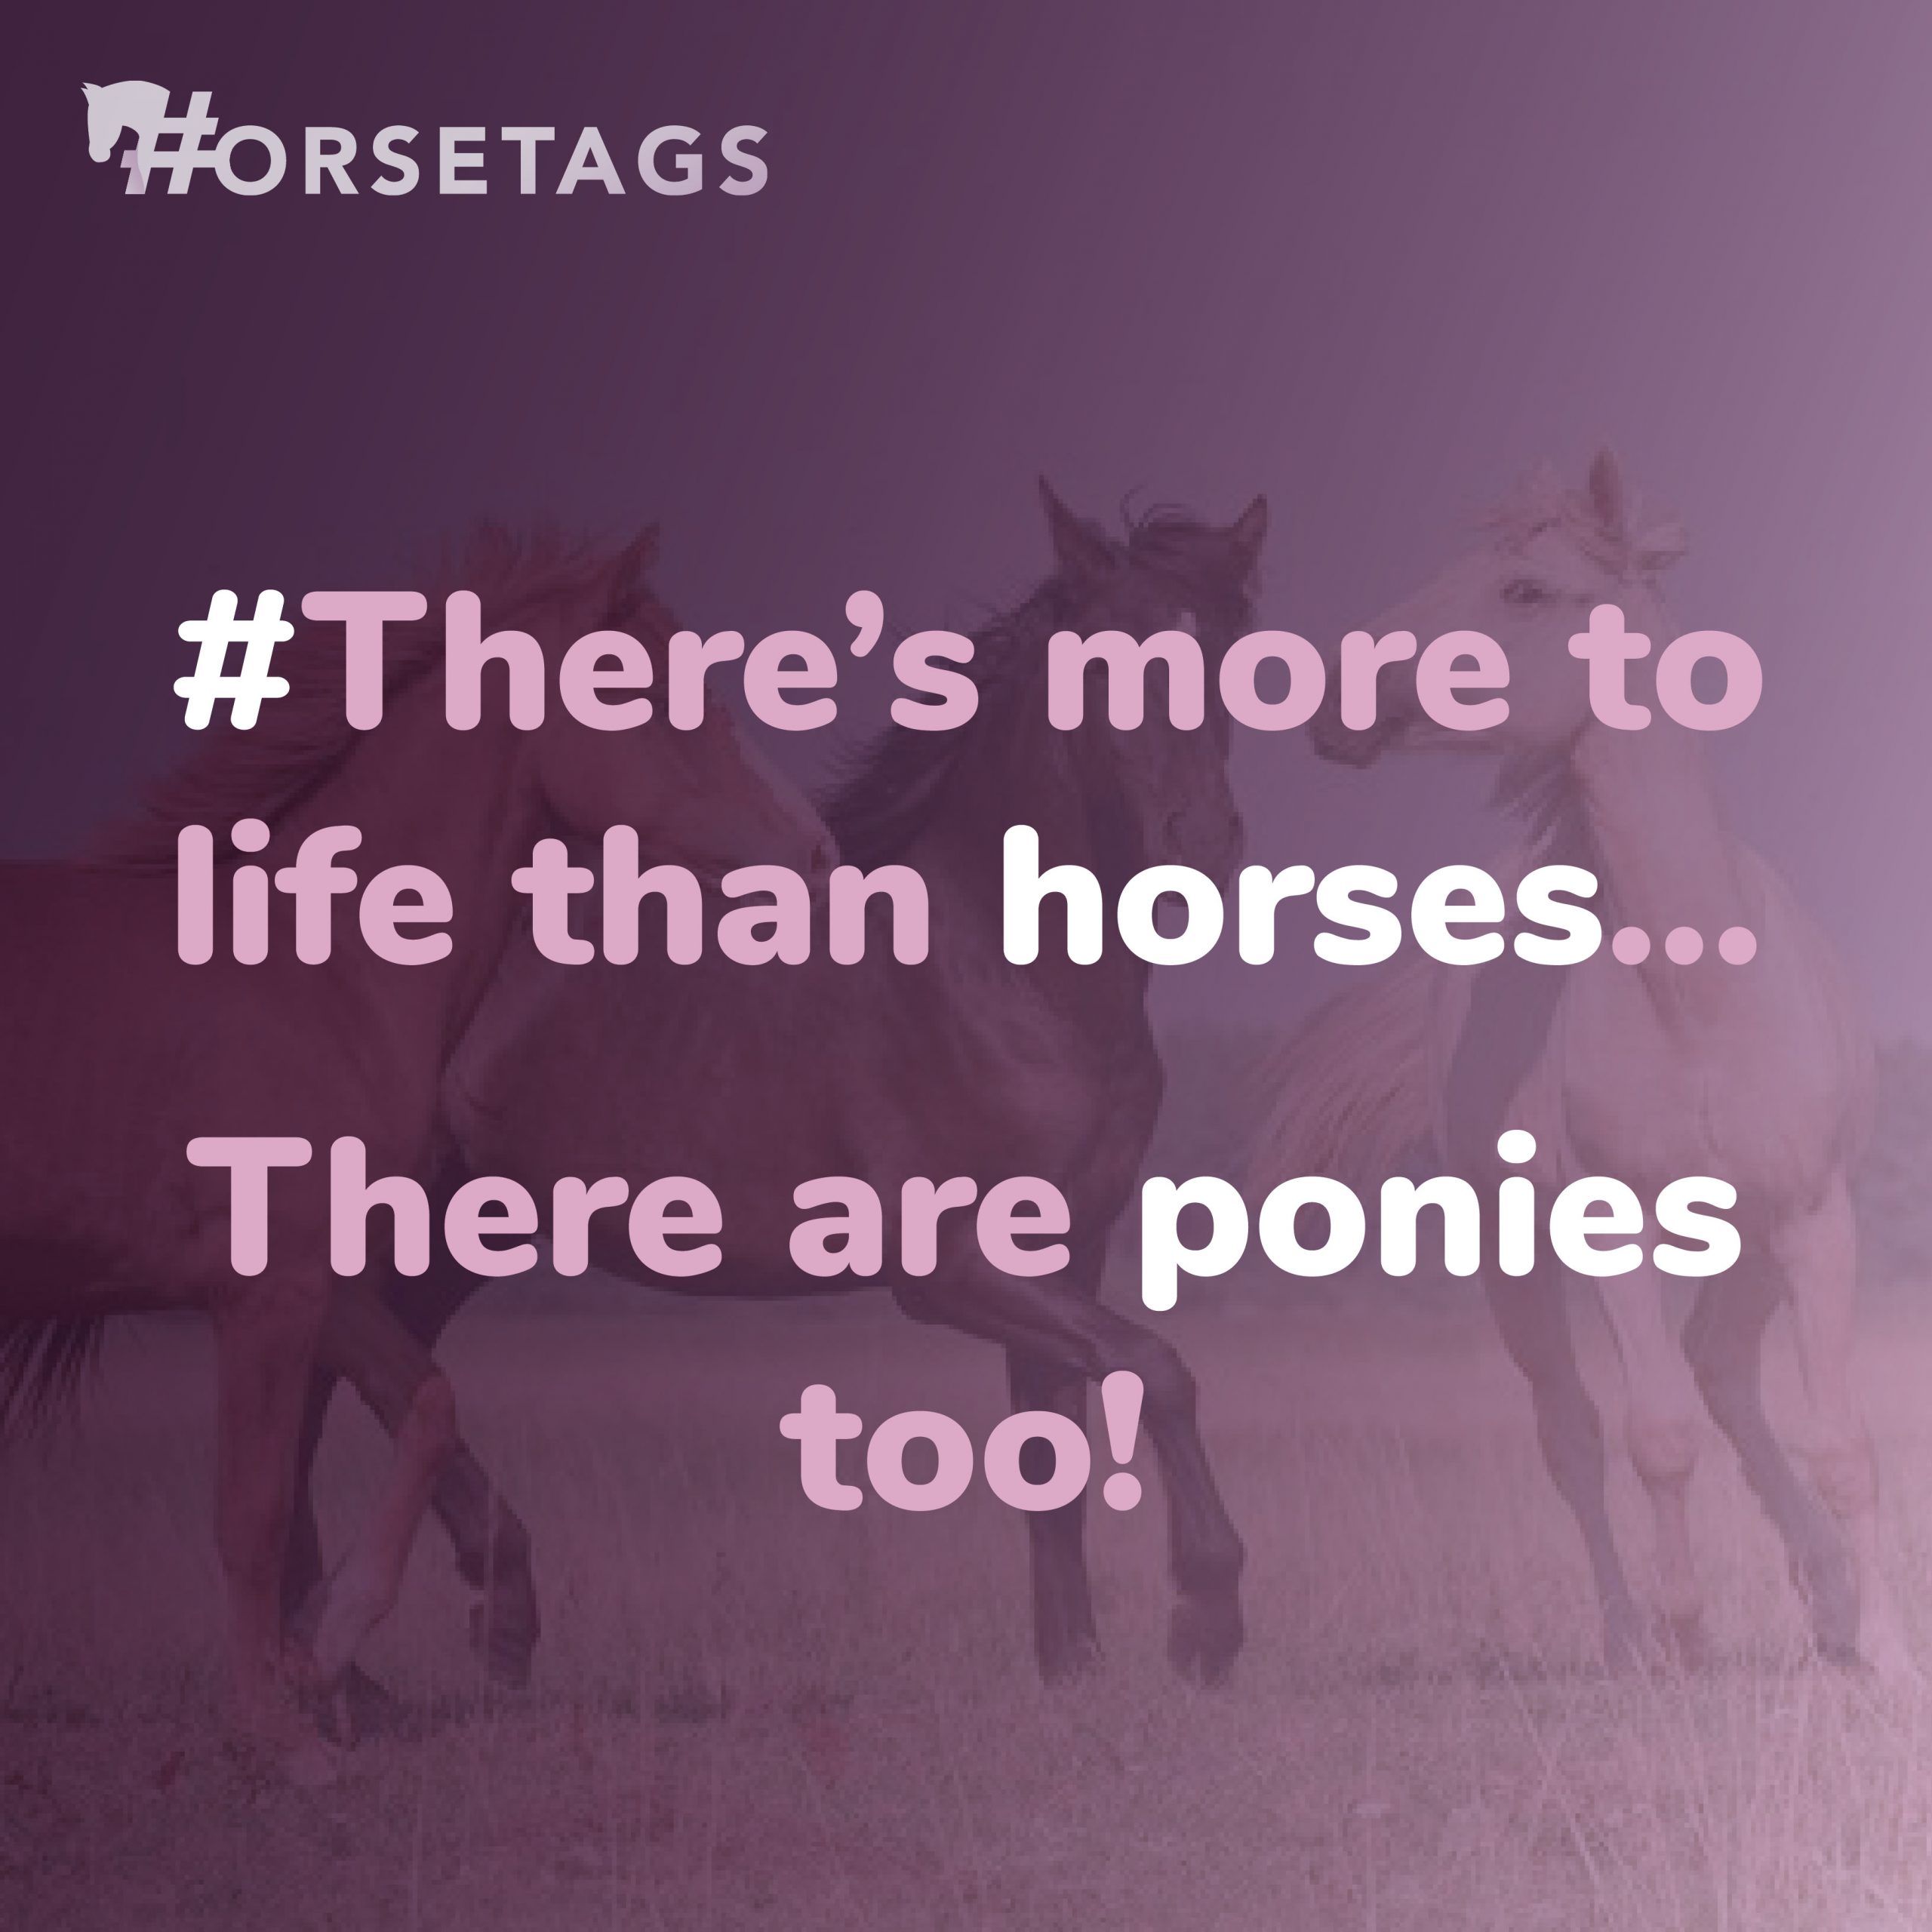 There's more to life than horses. There are ponies too.